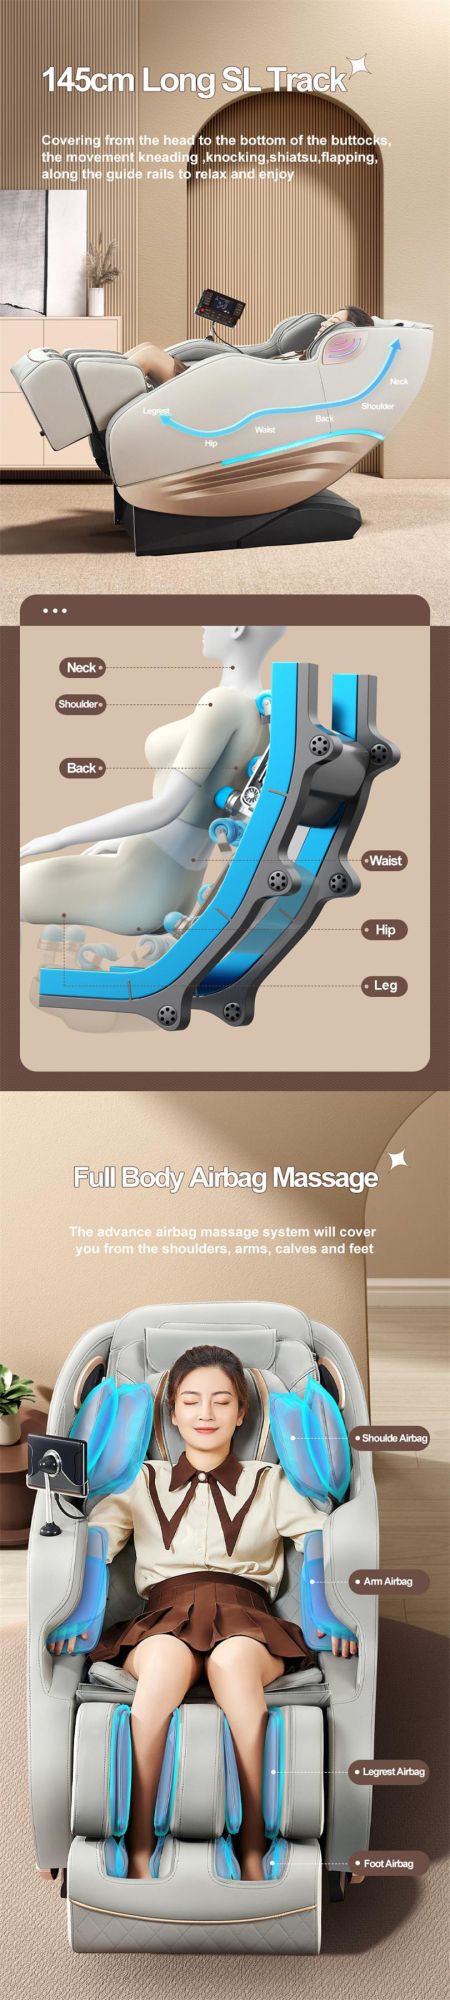 Sauron S350 2022 New Ai Voice SL Track 6D Manipulator Body Detection 0 Gravity Massage Chair with Heating Therapy